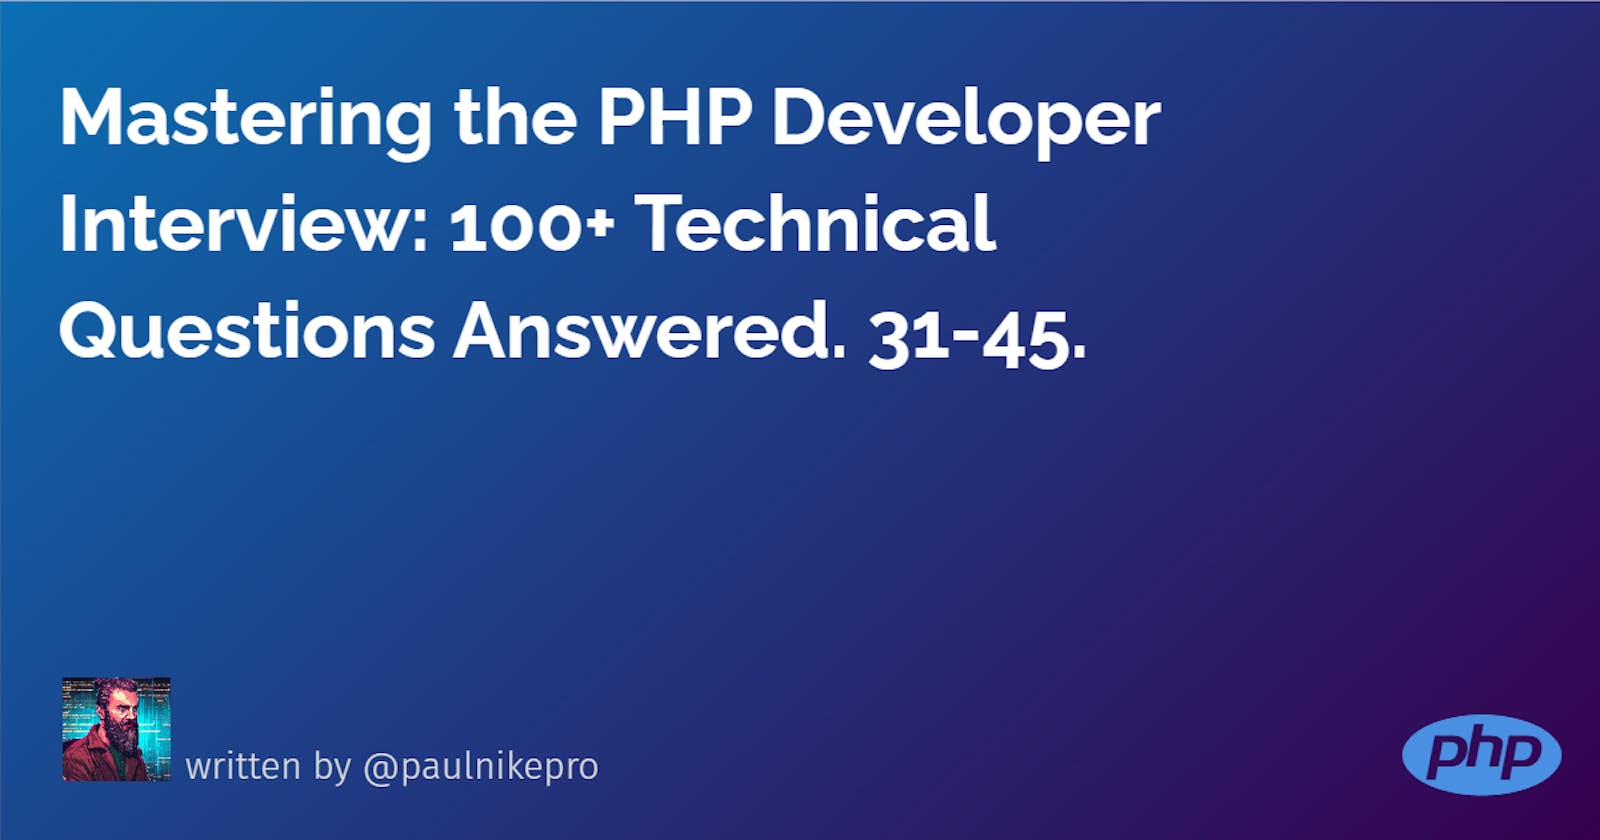 Mastering the PHP Developer Interview: 100+ Technical Questions Answered. 31-45.